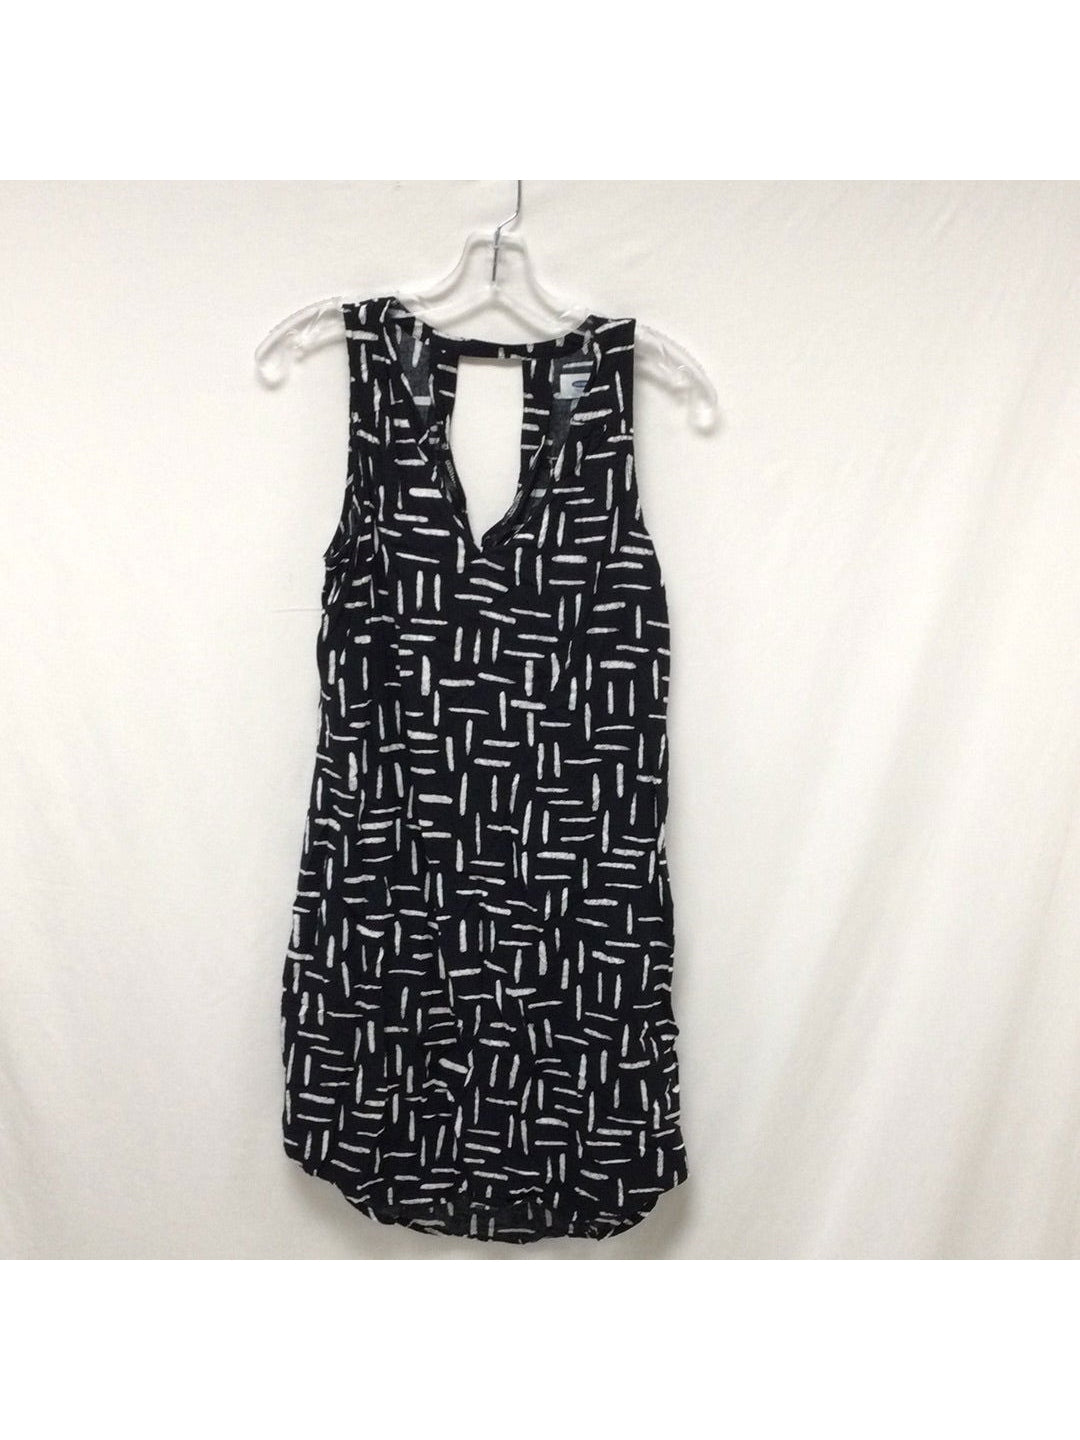 Old Navy Ladies Size Small Black and White Line Design Dress - The Kennedy Collective Thrift - 